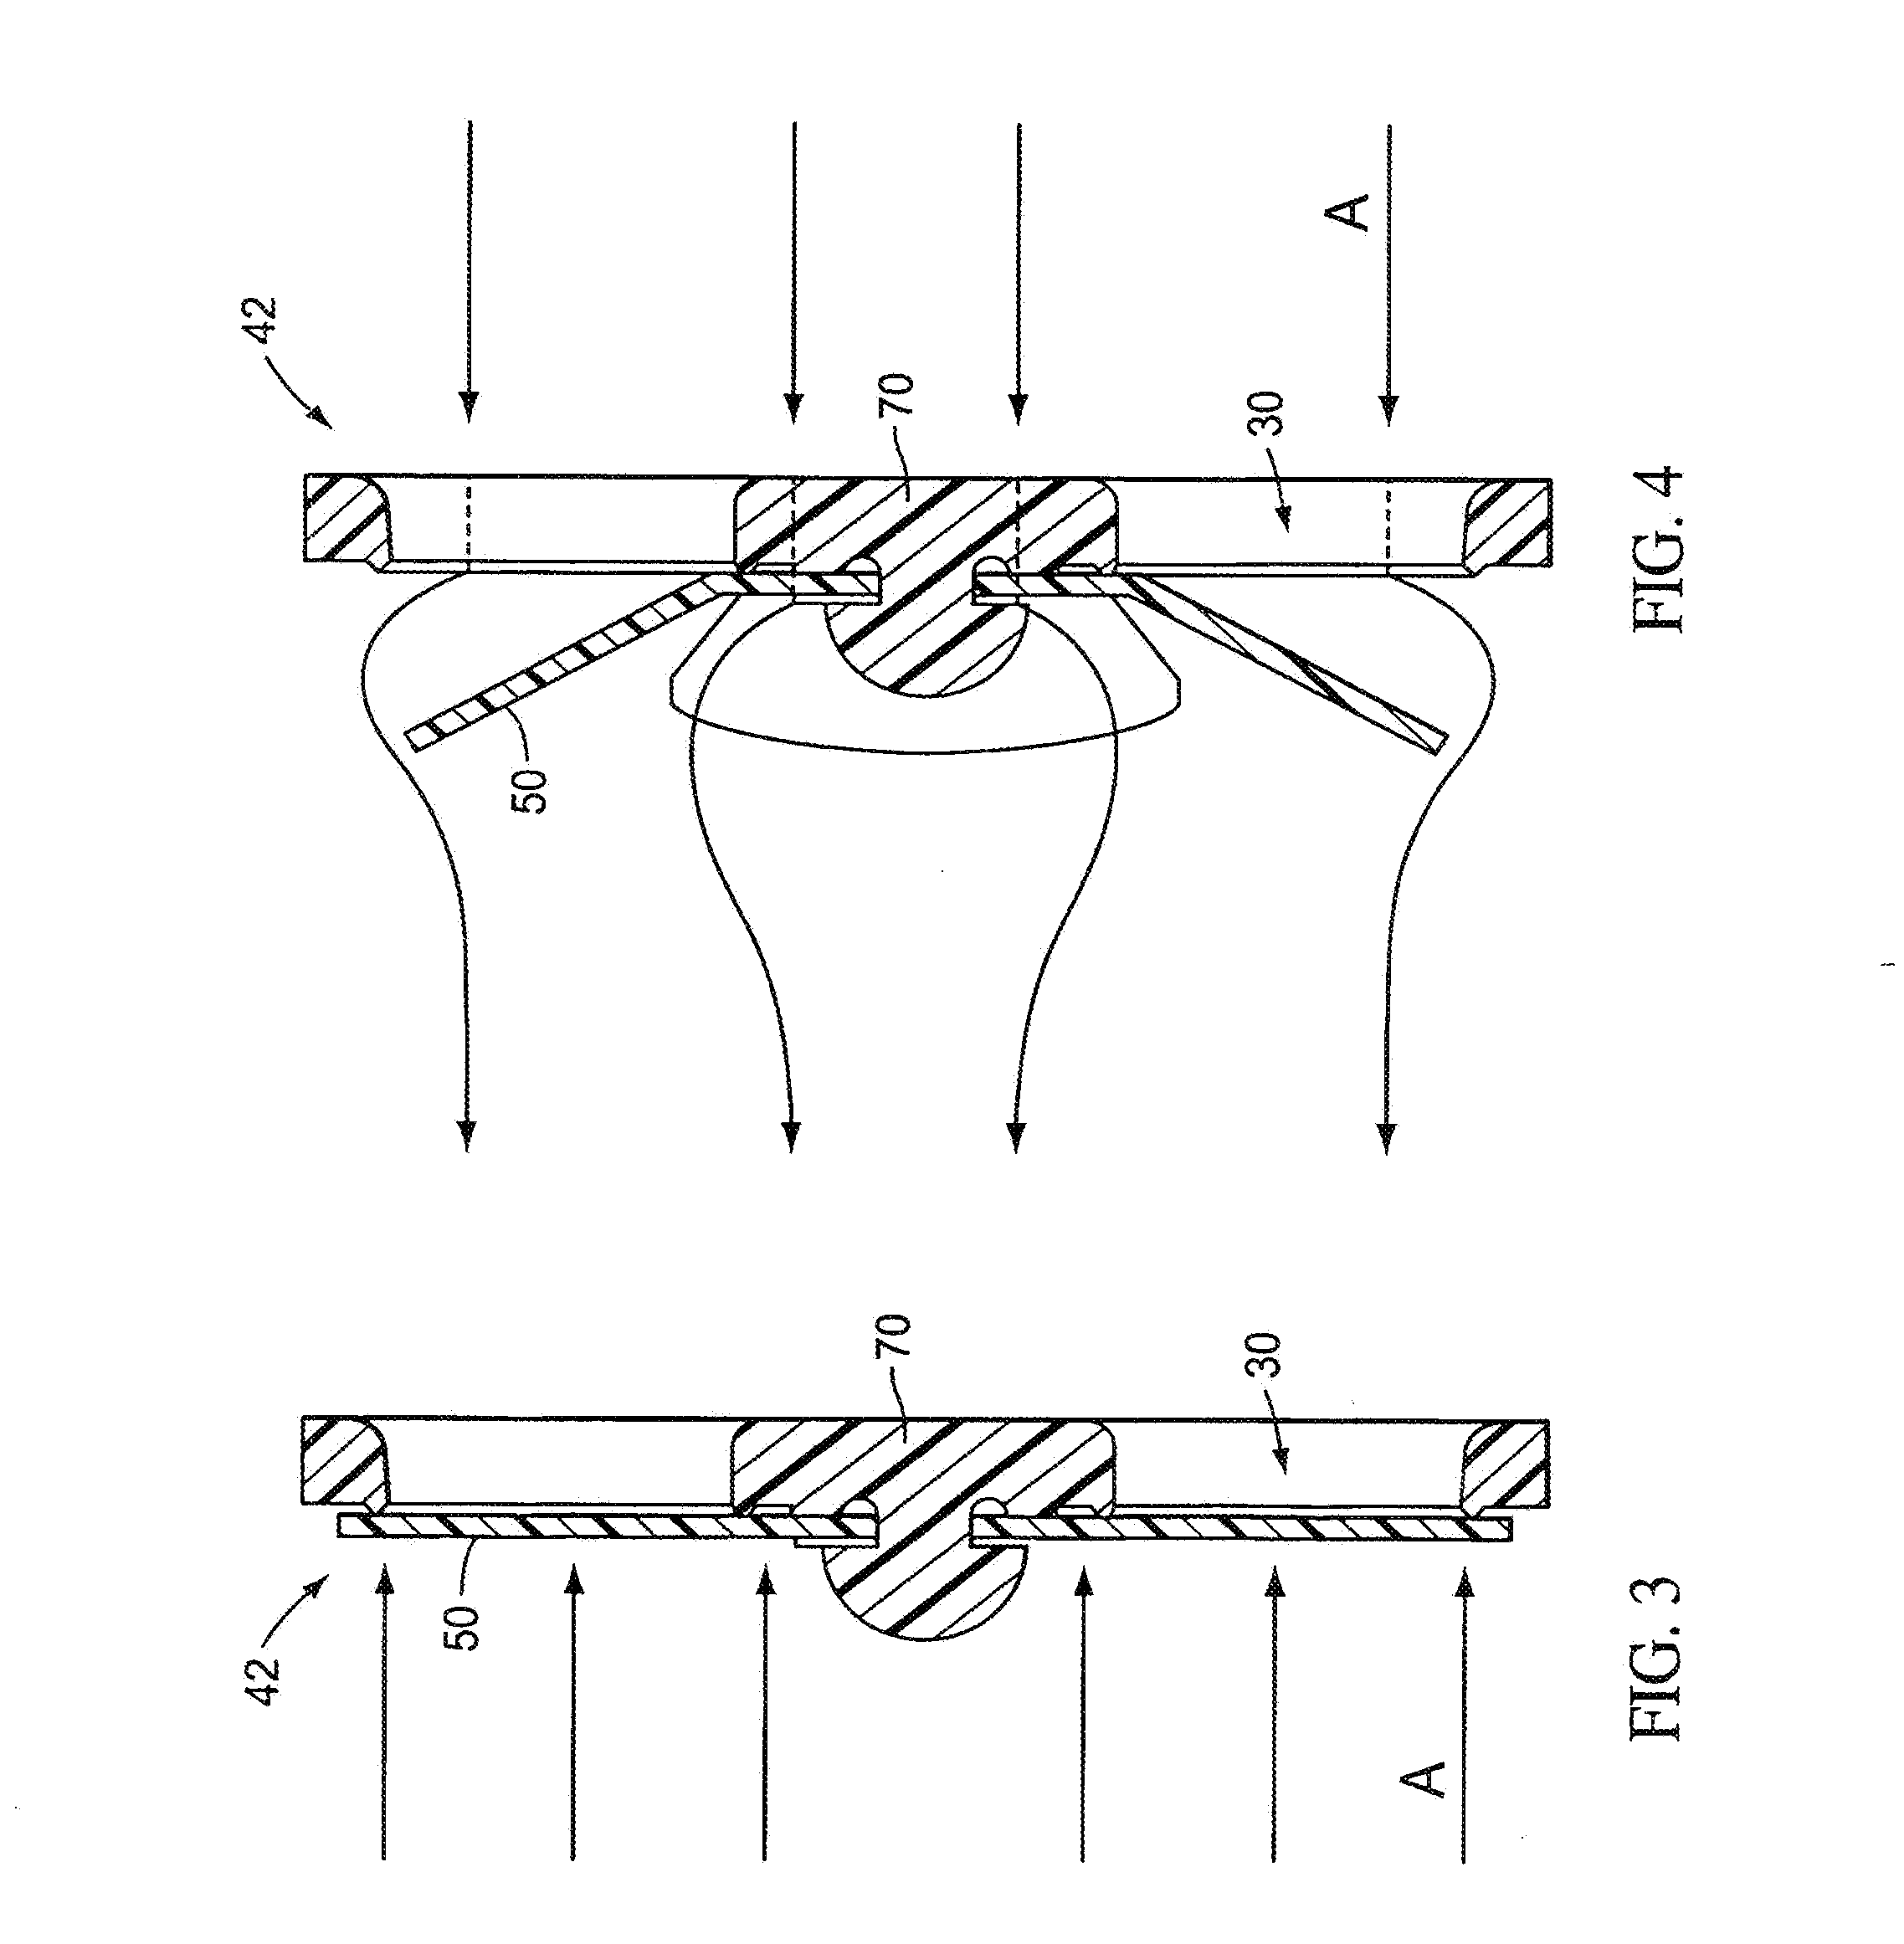 Valves, devices, and methods for endobronchial therapy